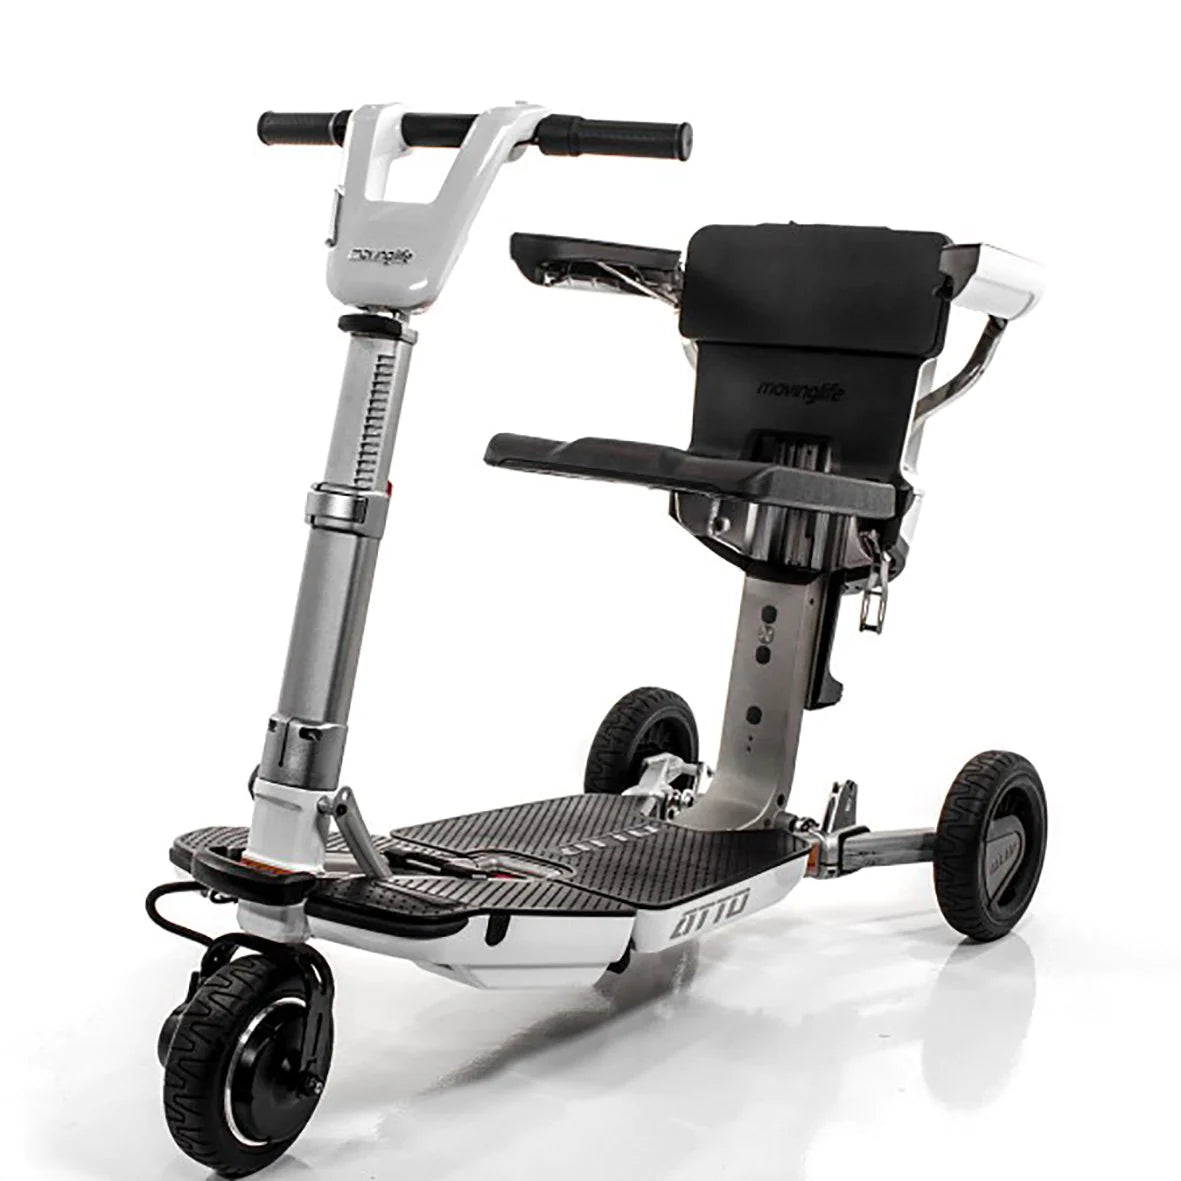 Top reasons to choose the ATTO portable mobility scooter for your mobility needs